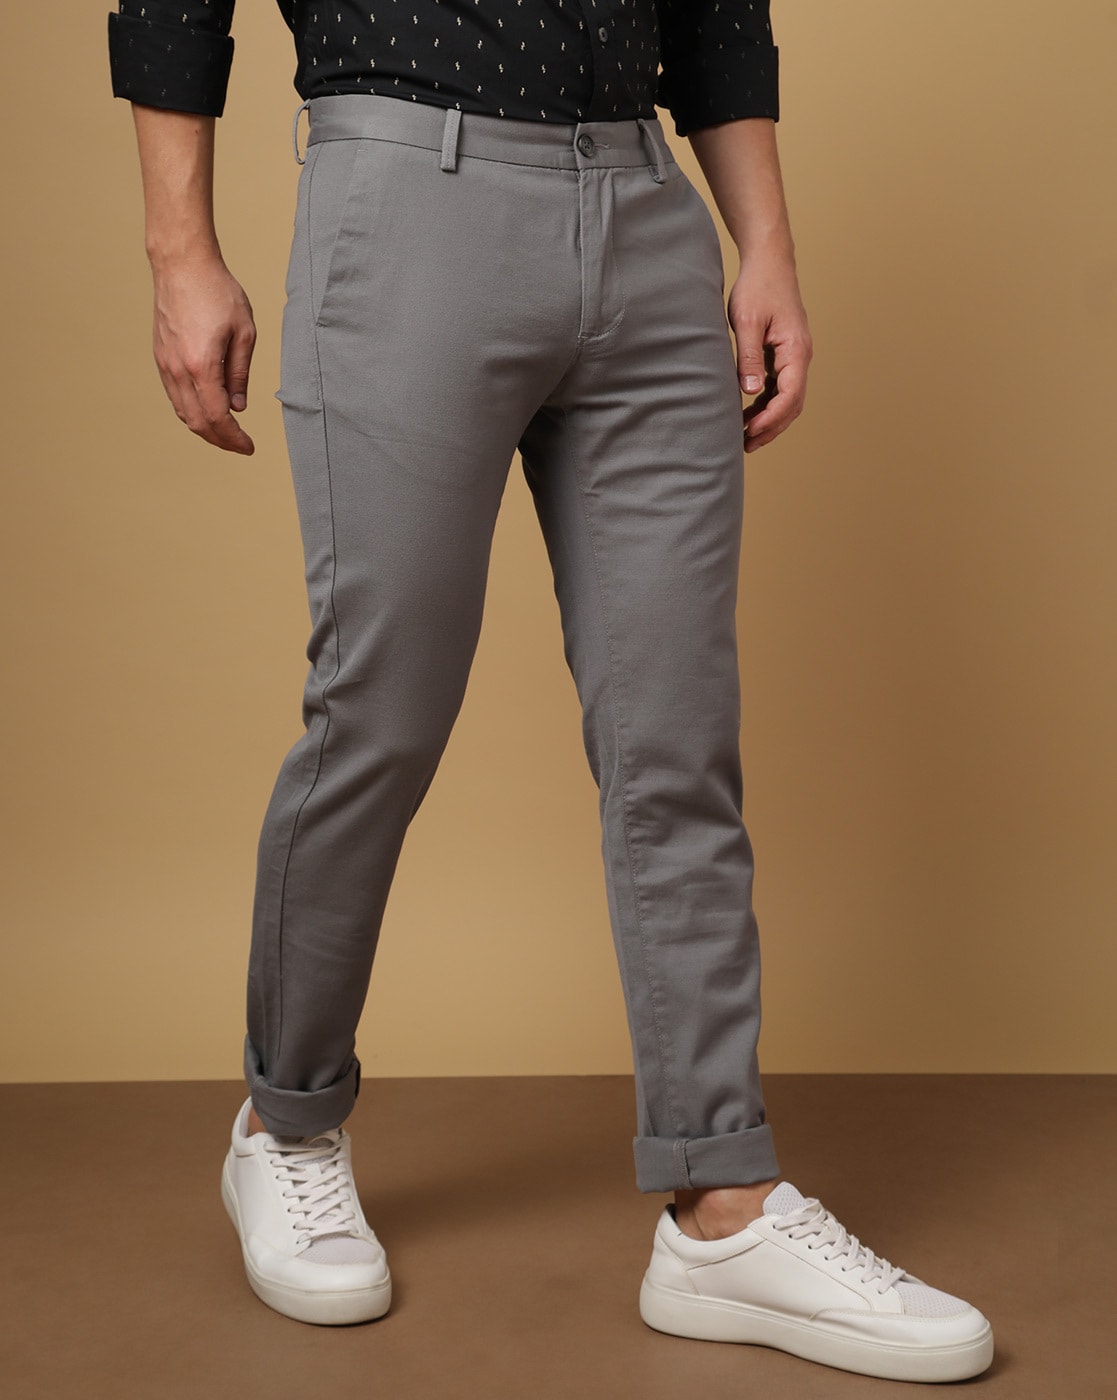 Mens Sports Pants Long Baggy Casual Trousers Gym Joggers Ice Silk  Sweatpants  eBay